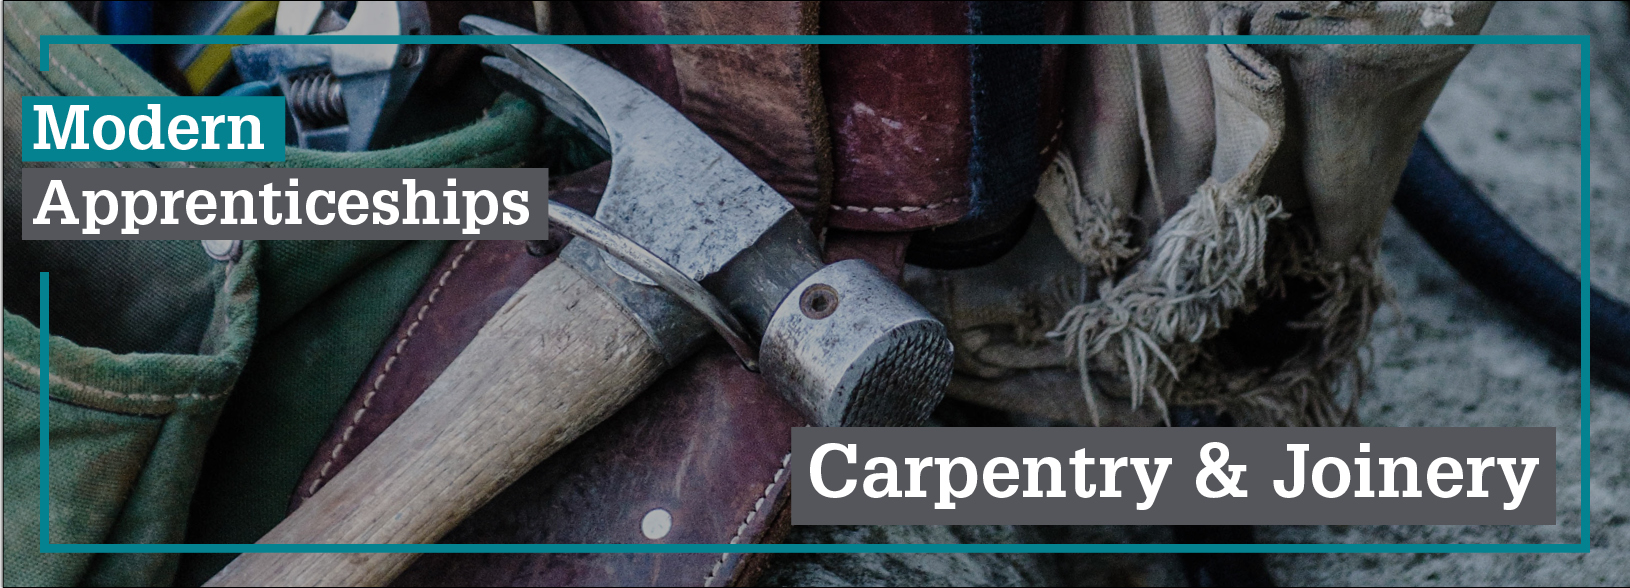 Modern Apprenticeship in Carpentry and Joinery